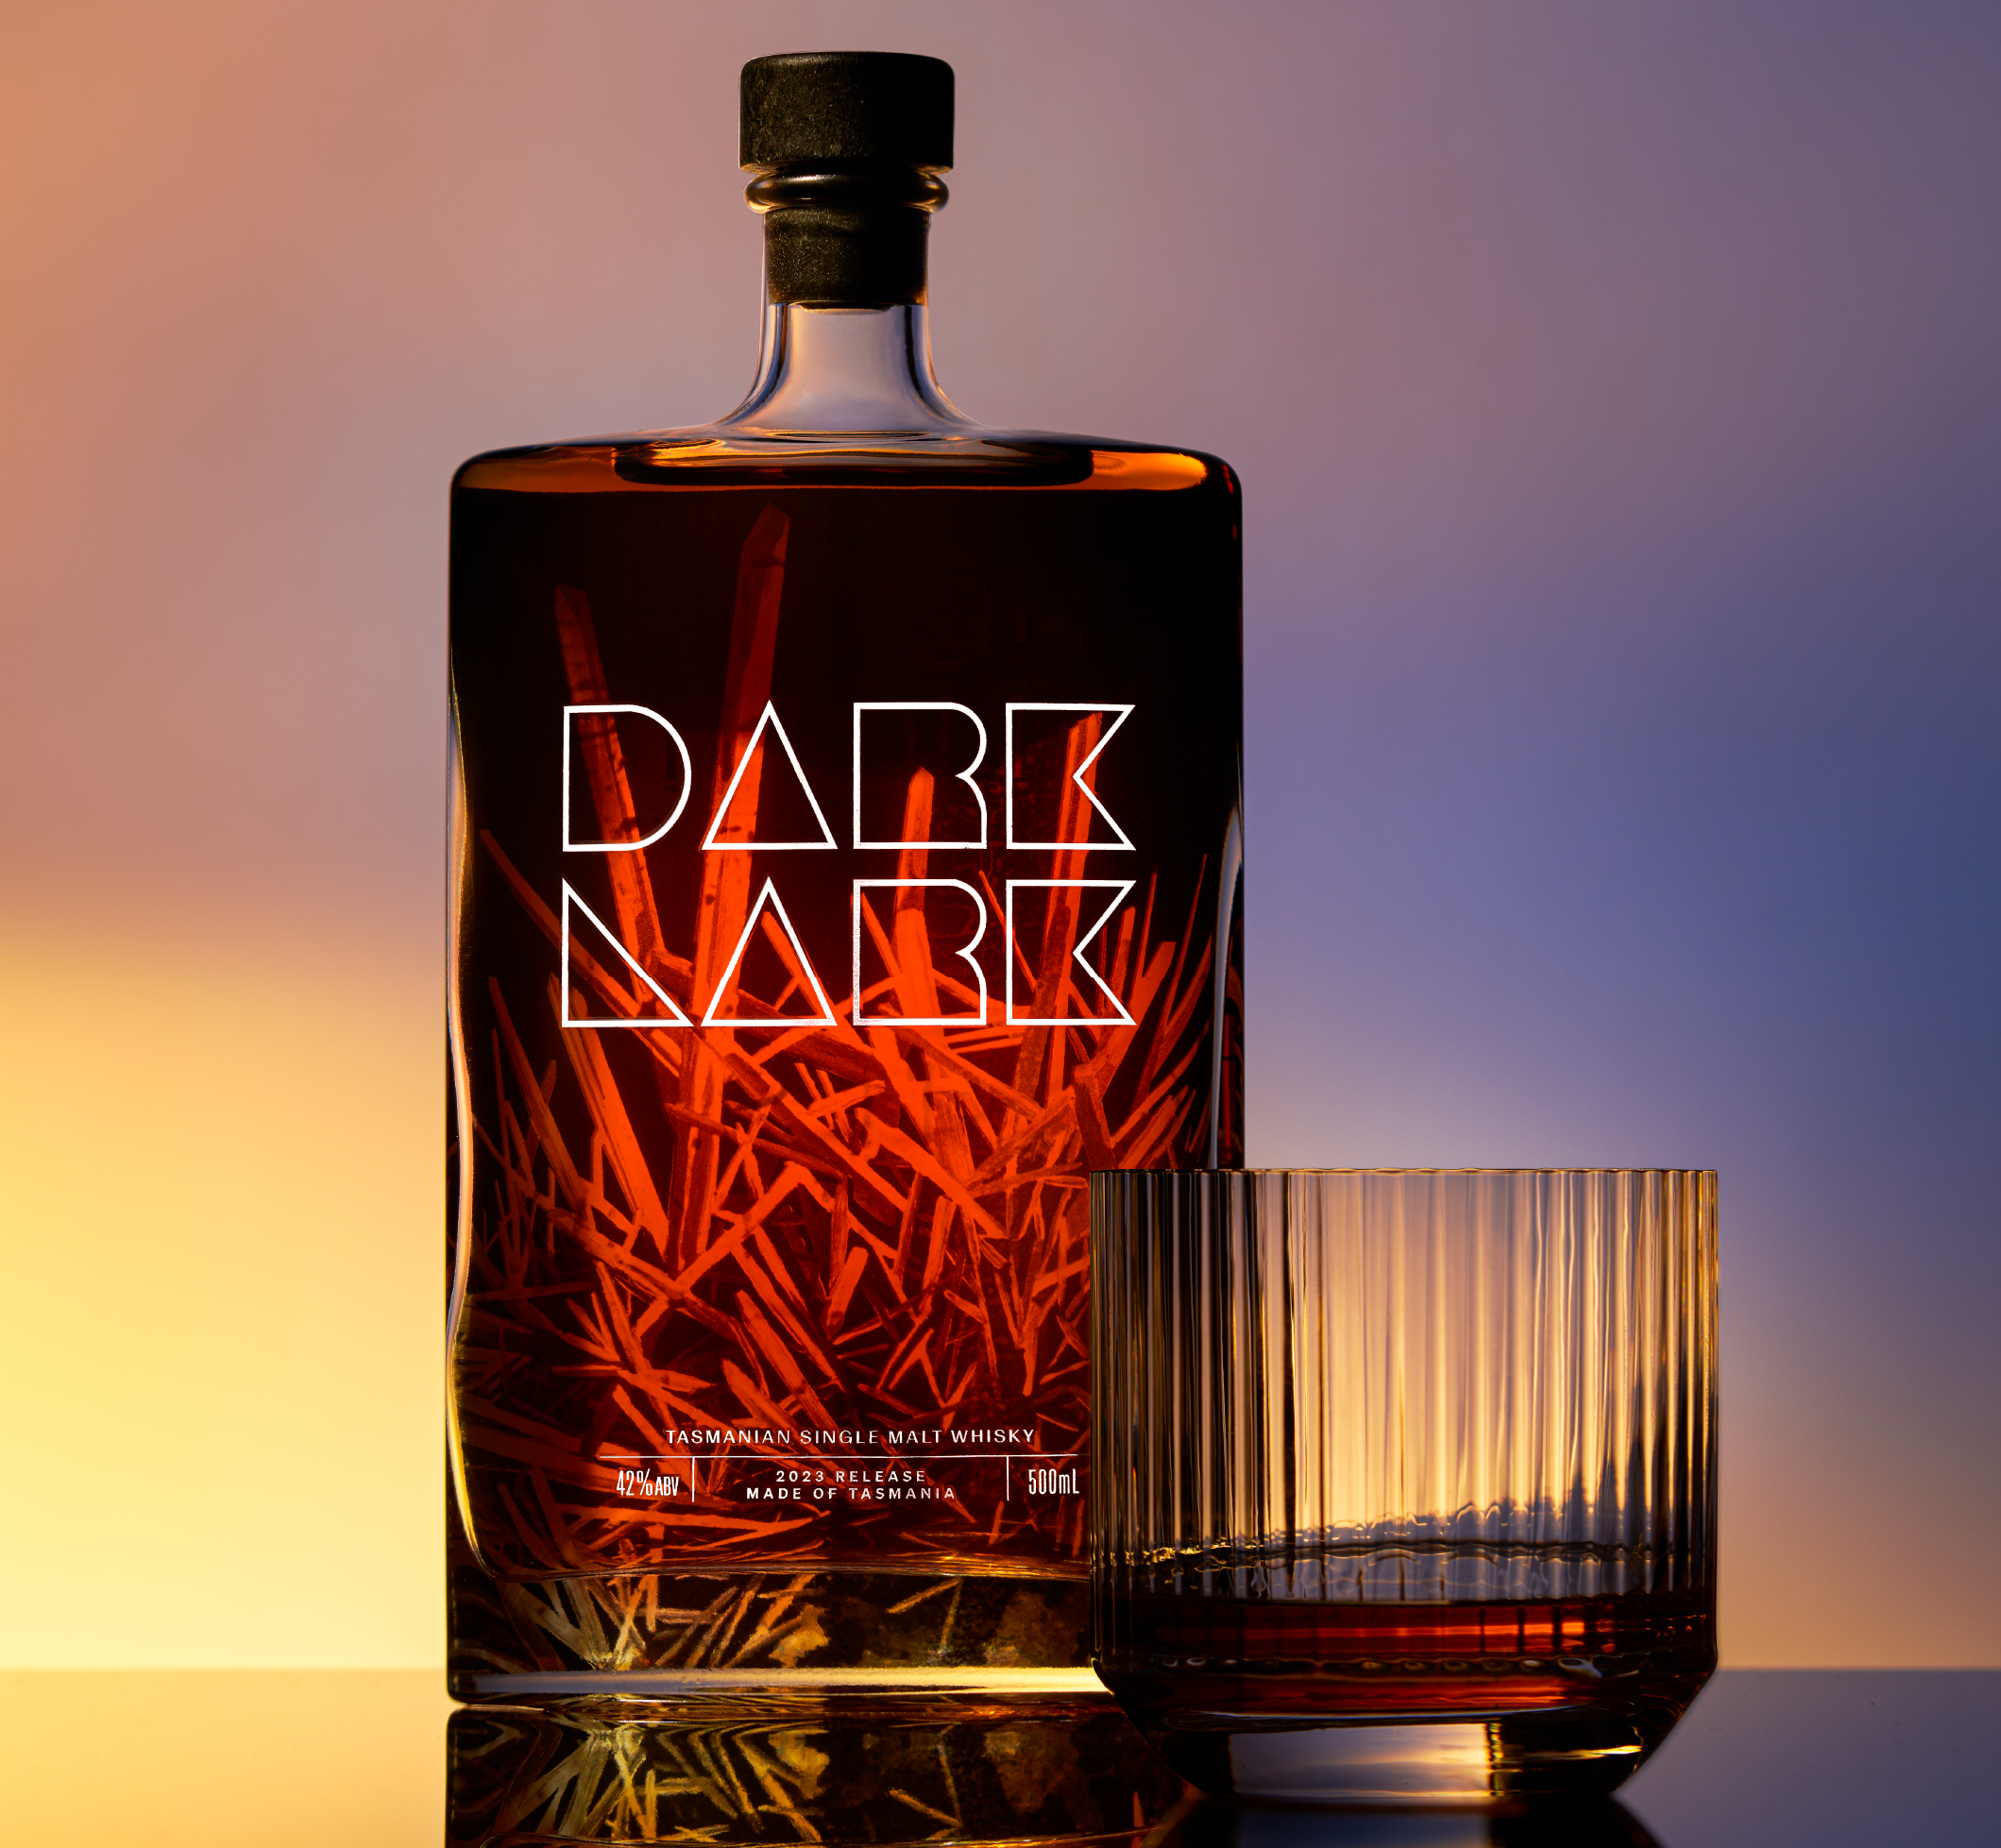 Image of Igniting the glow with the help of a double-sided label